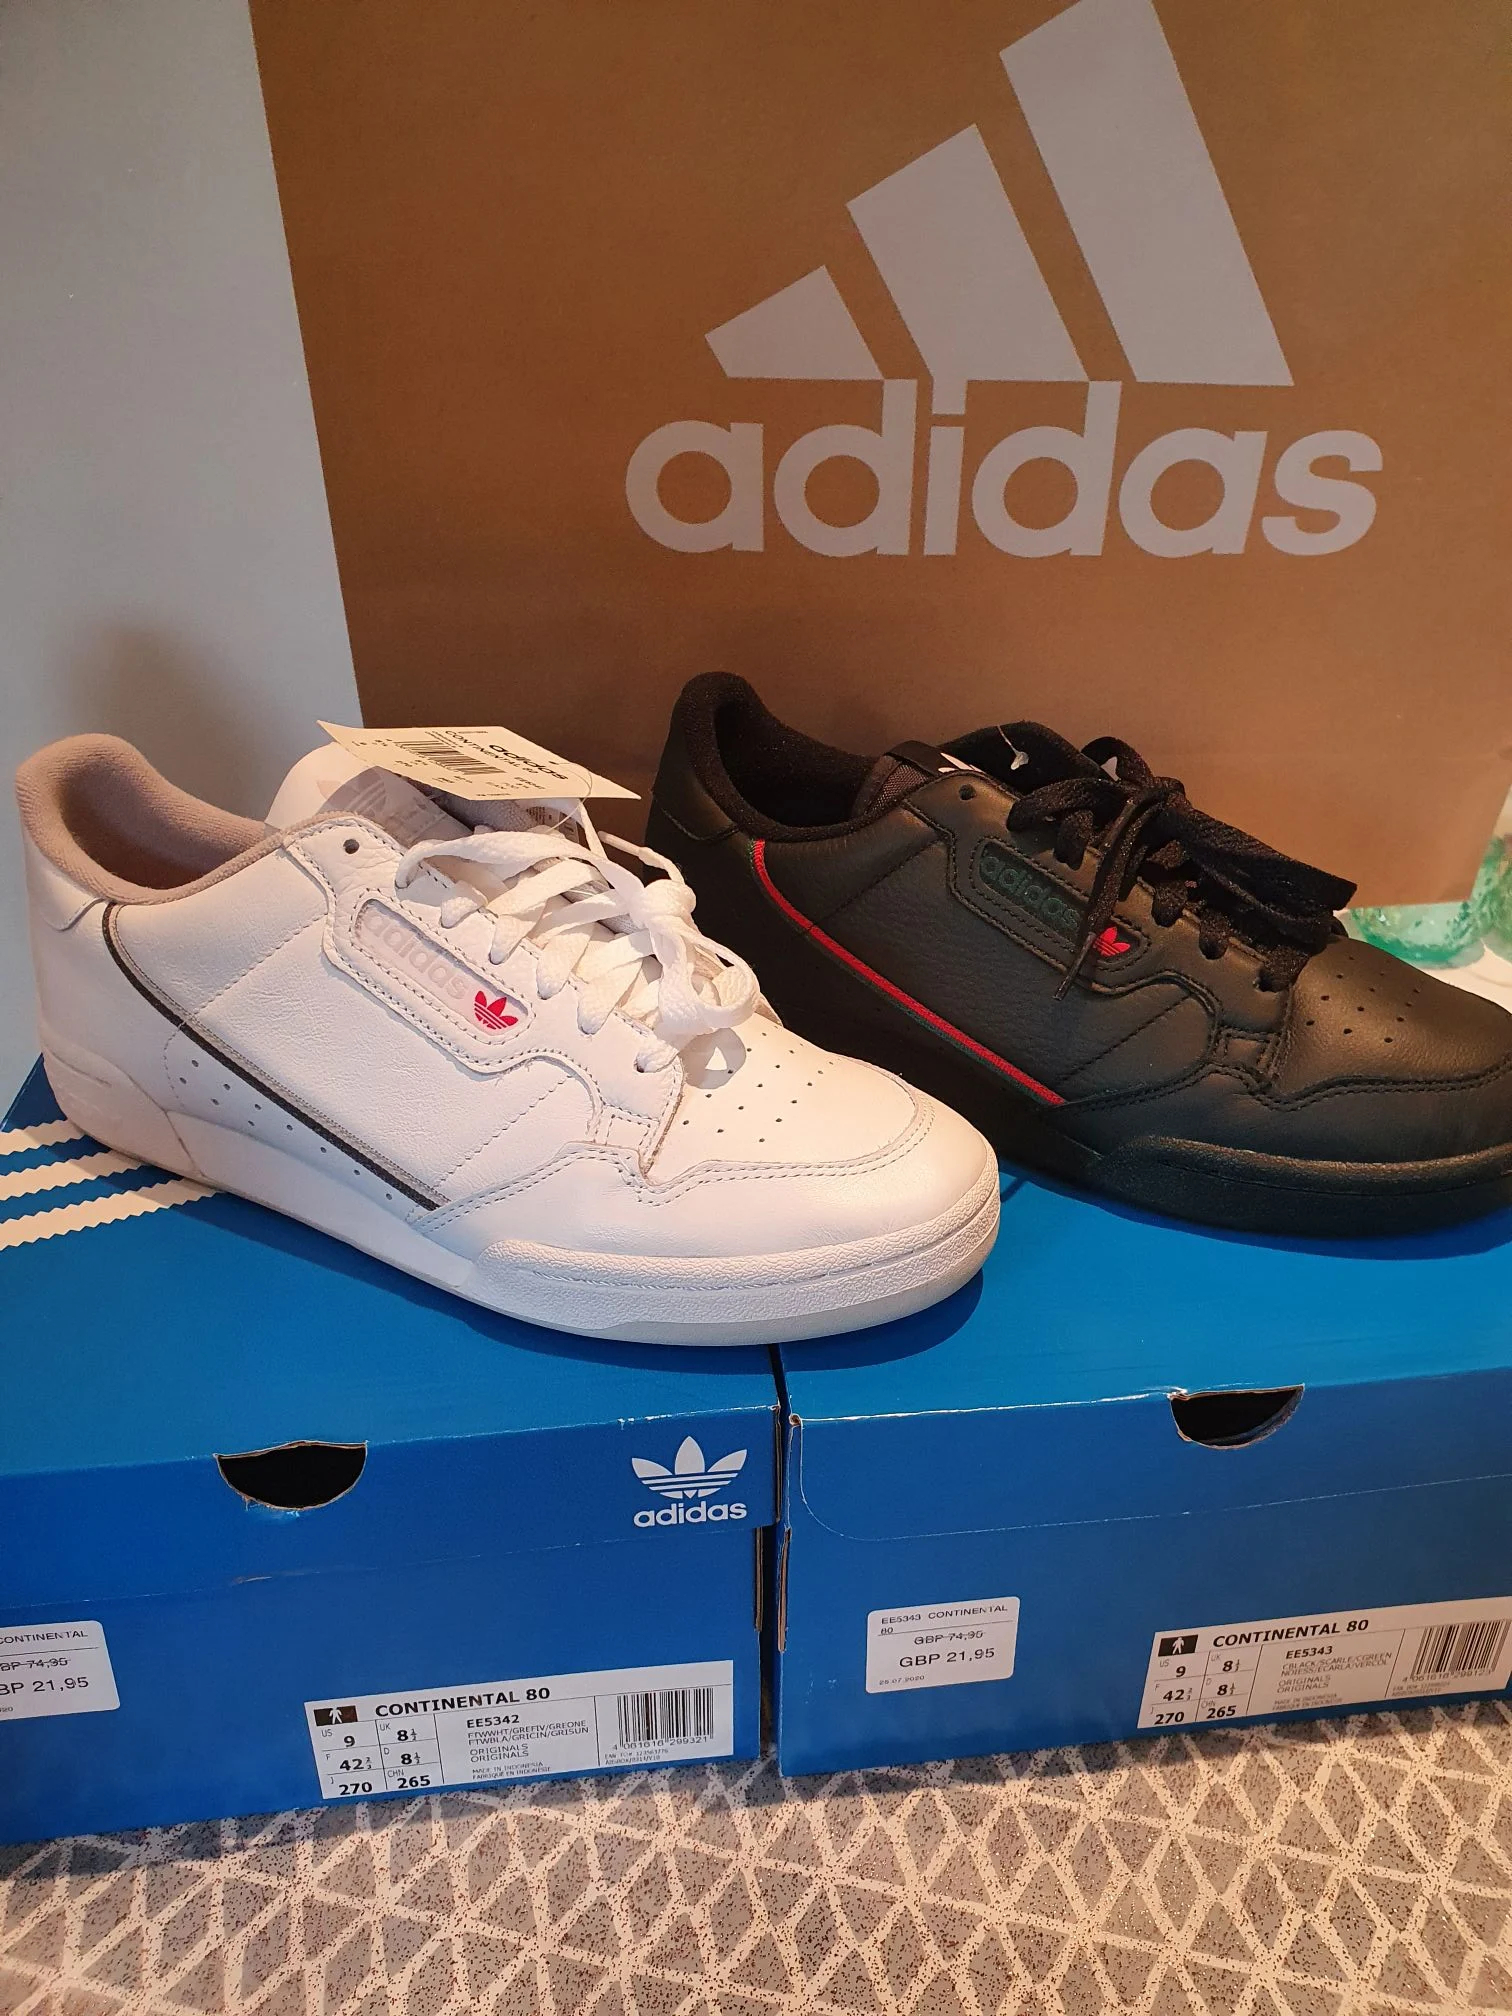 adidas york outlet